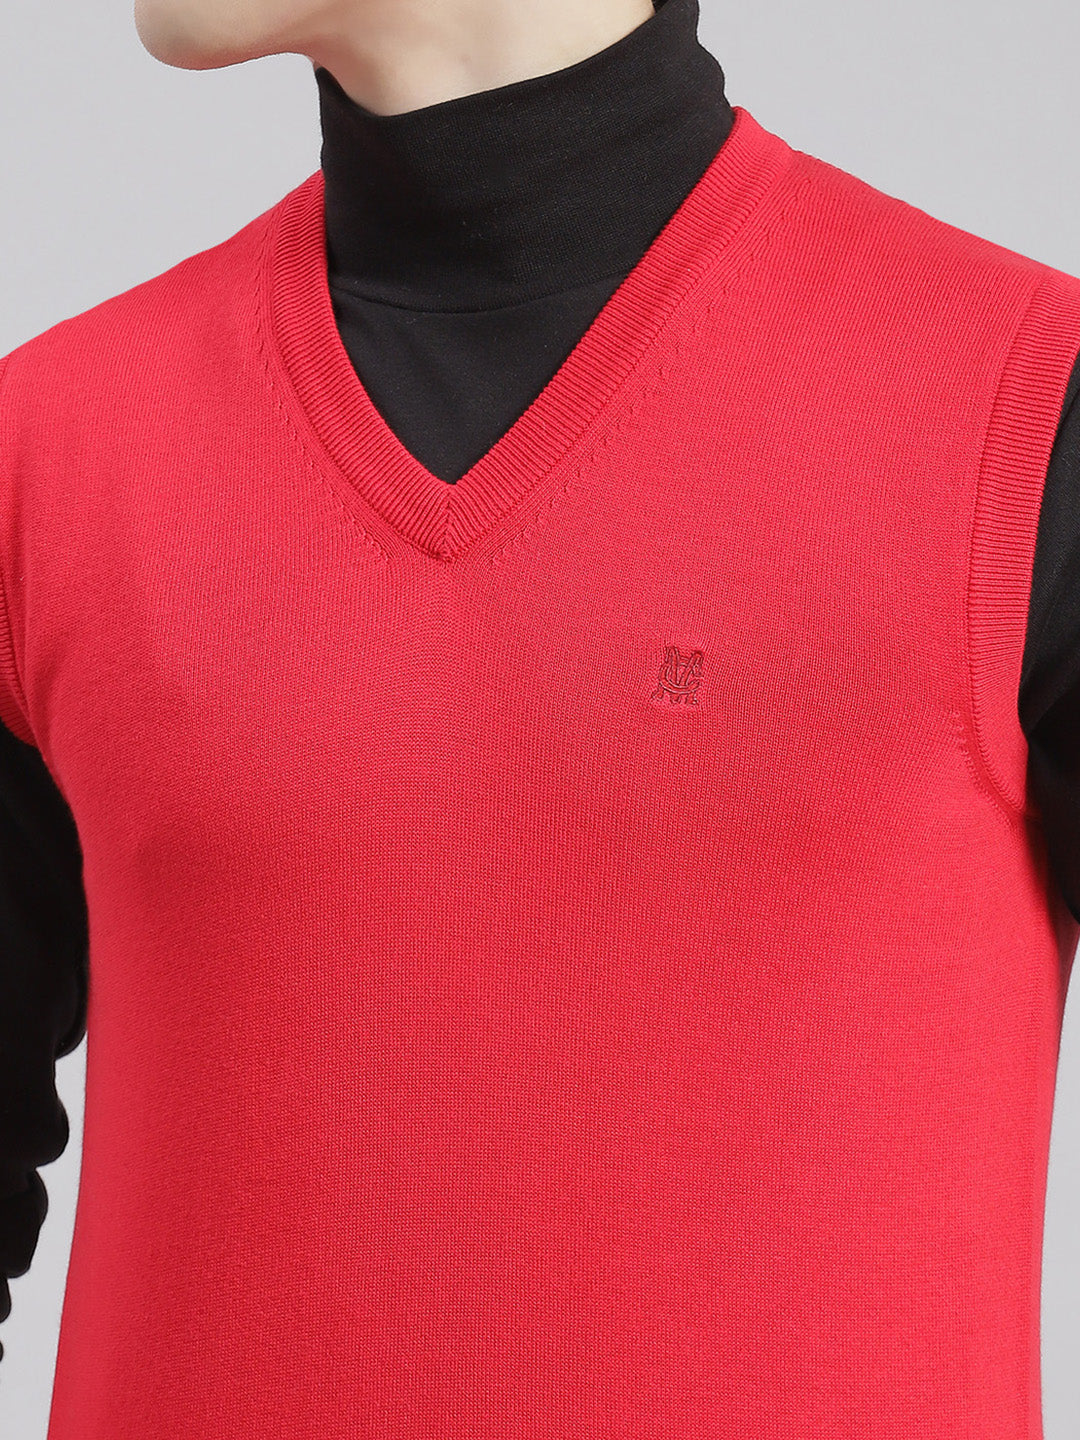 Men Red Solid V Neck Sleeveless Sweaters/Pullovers